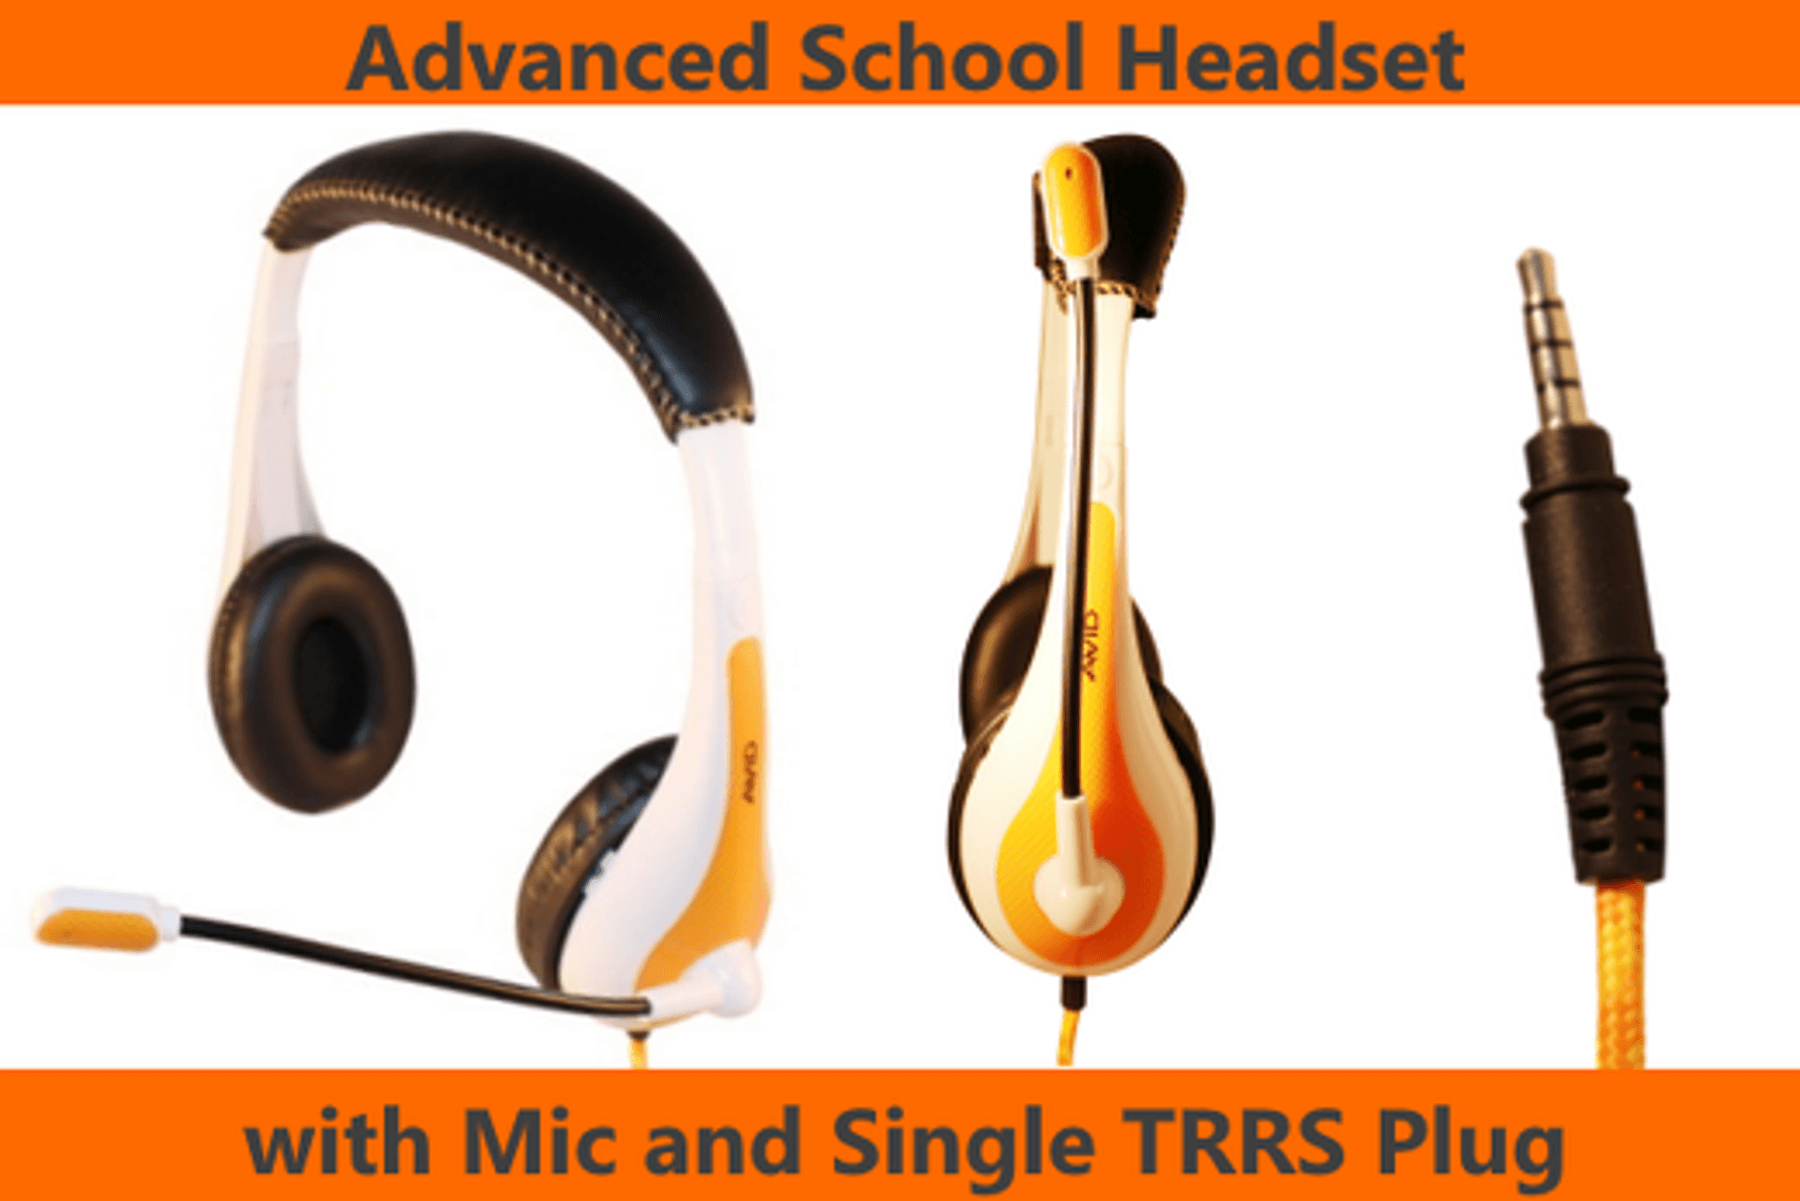 For students who are looking for anschool headset, this article centers the features and recommendations that will help you find exactly what you're looking for.